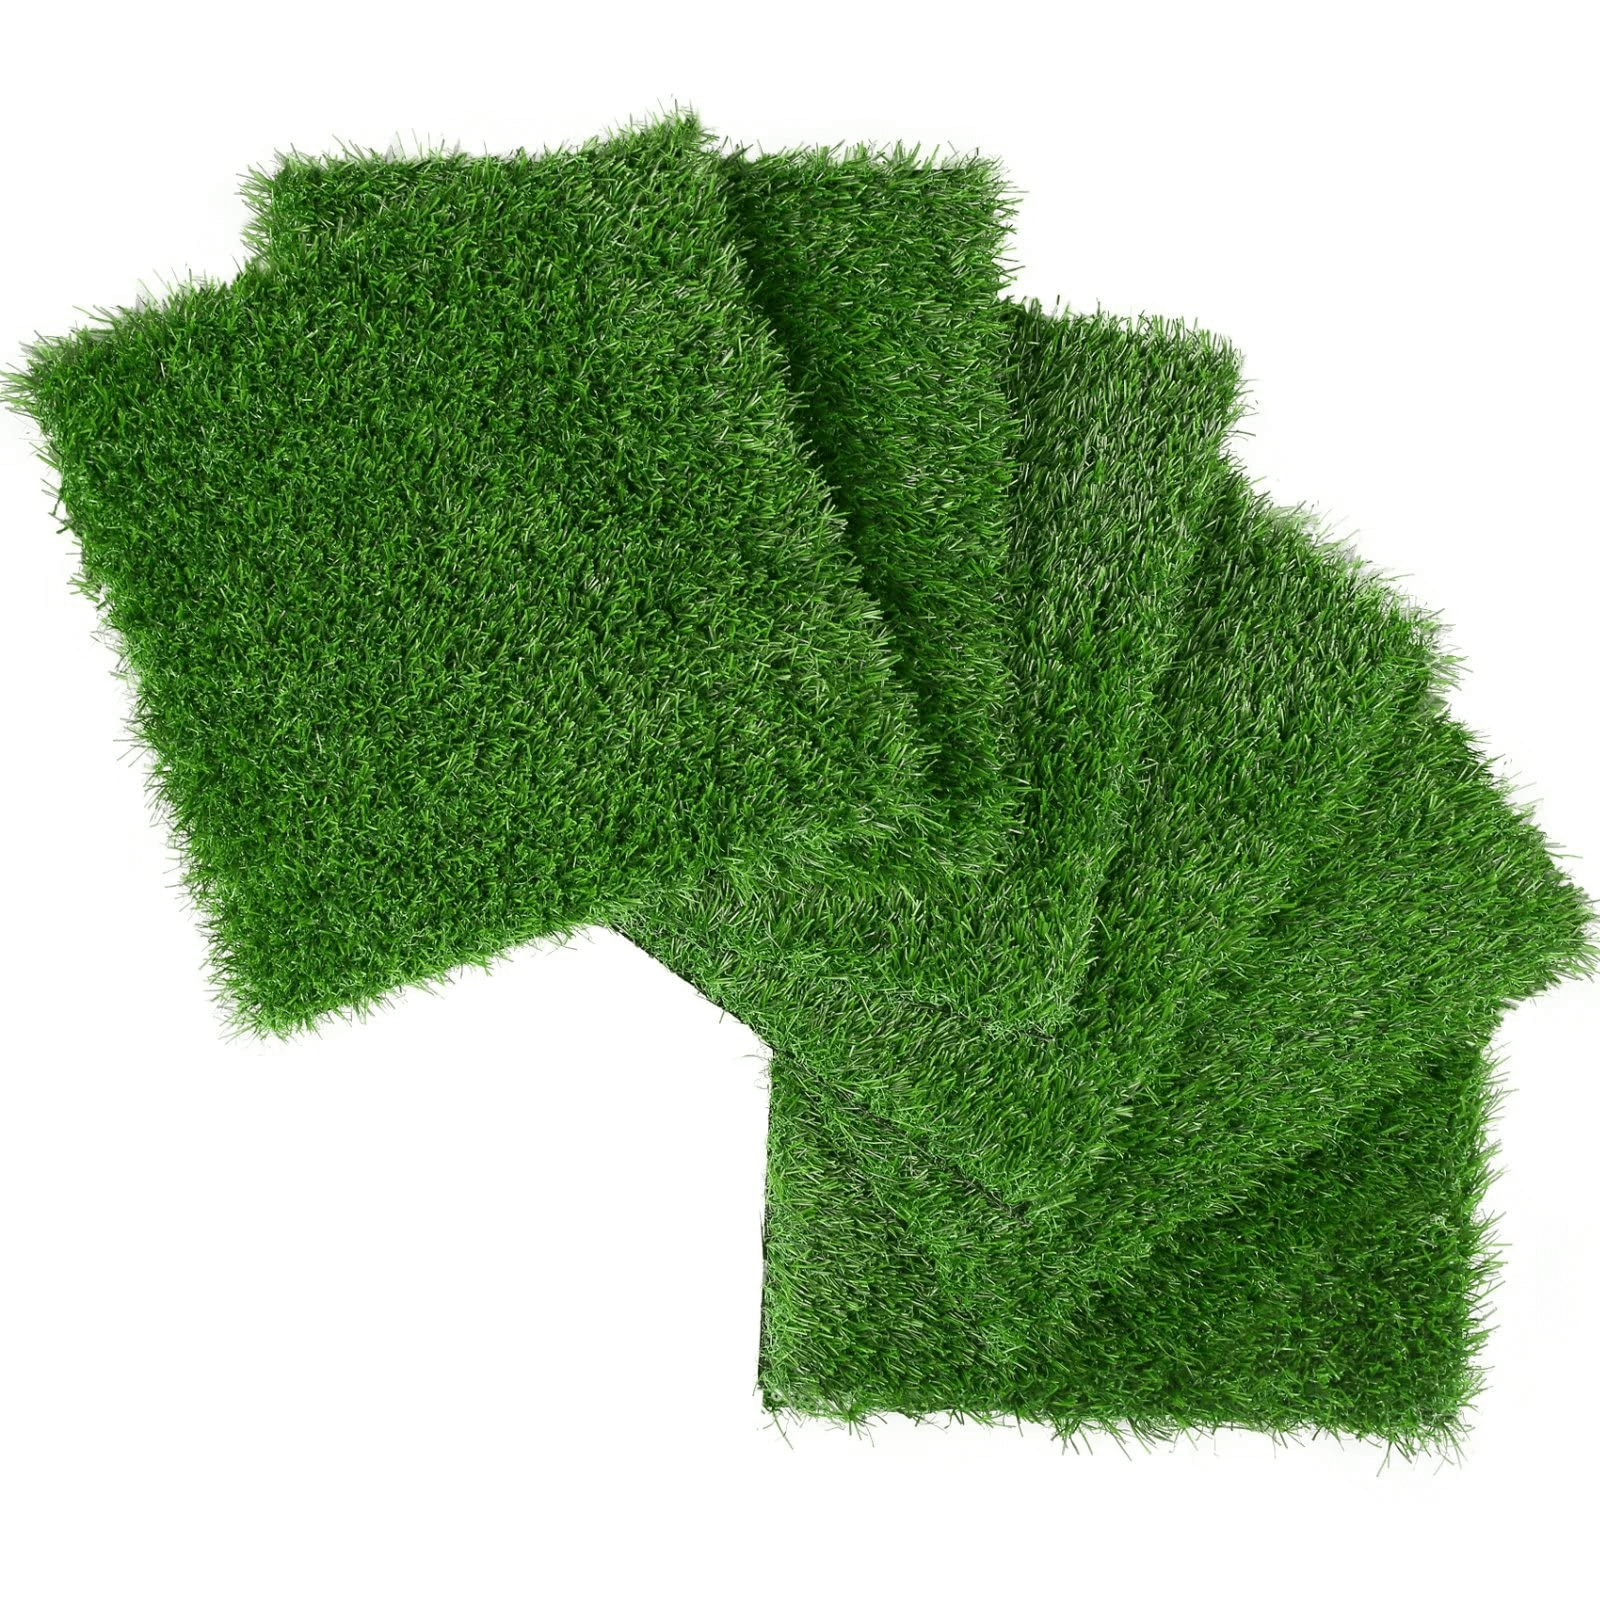 XLX Turf Grass Table Runner 12 x 36 inch, Green Artificial Tabletop Decor for Wedding, Birthday Party, Banquet, Baby Shower